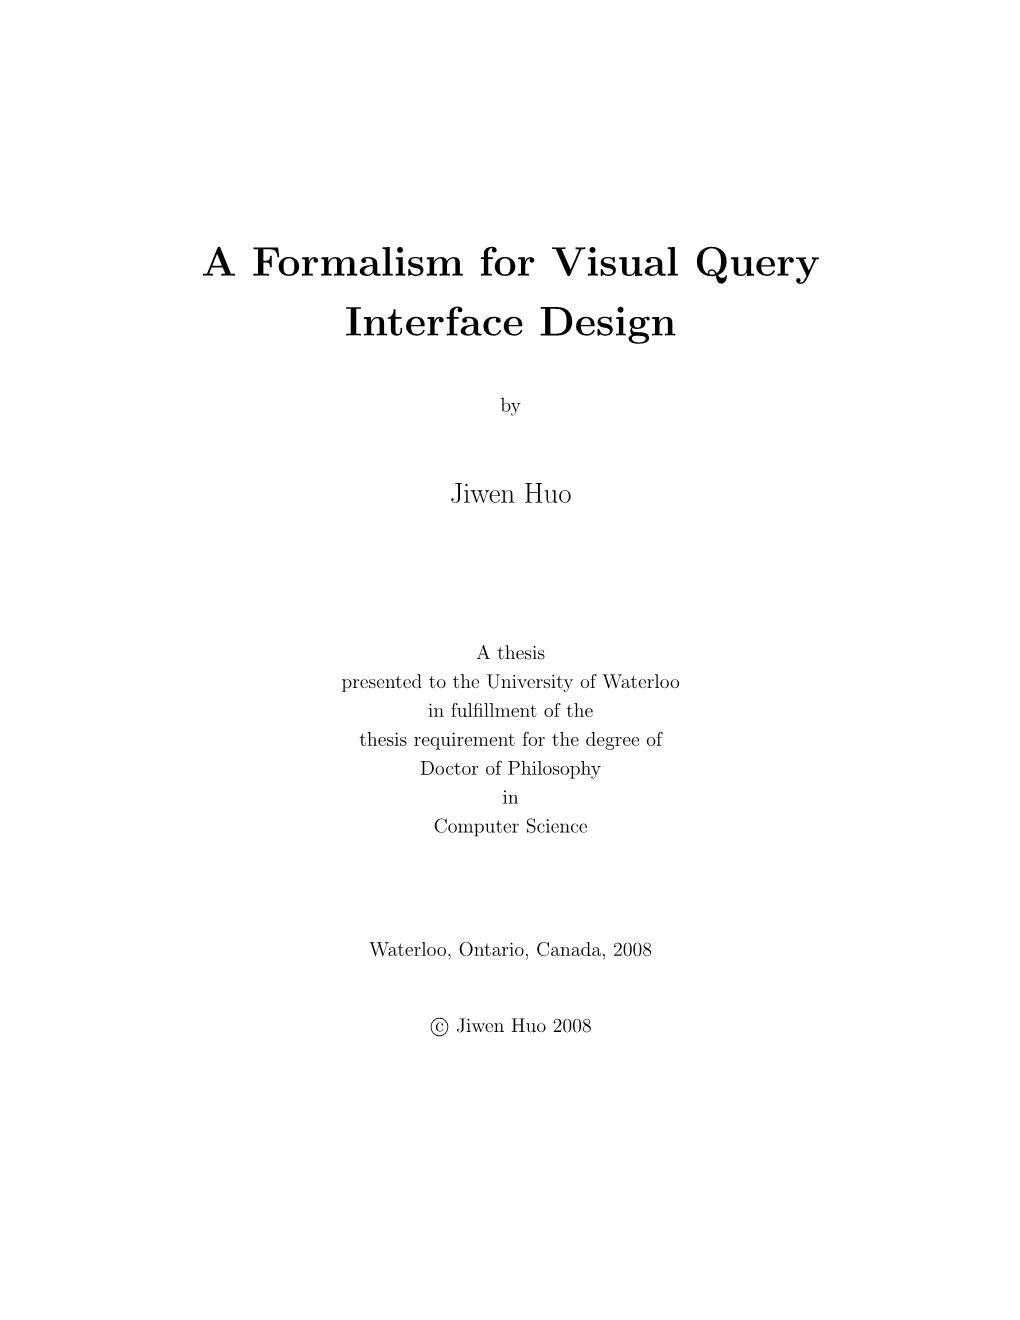 A Formalism for Visual Query Interface Design